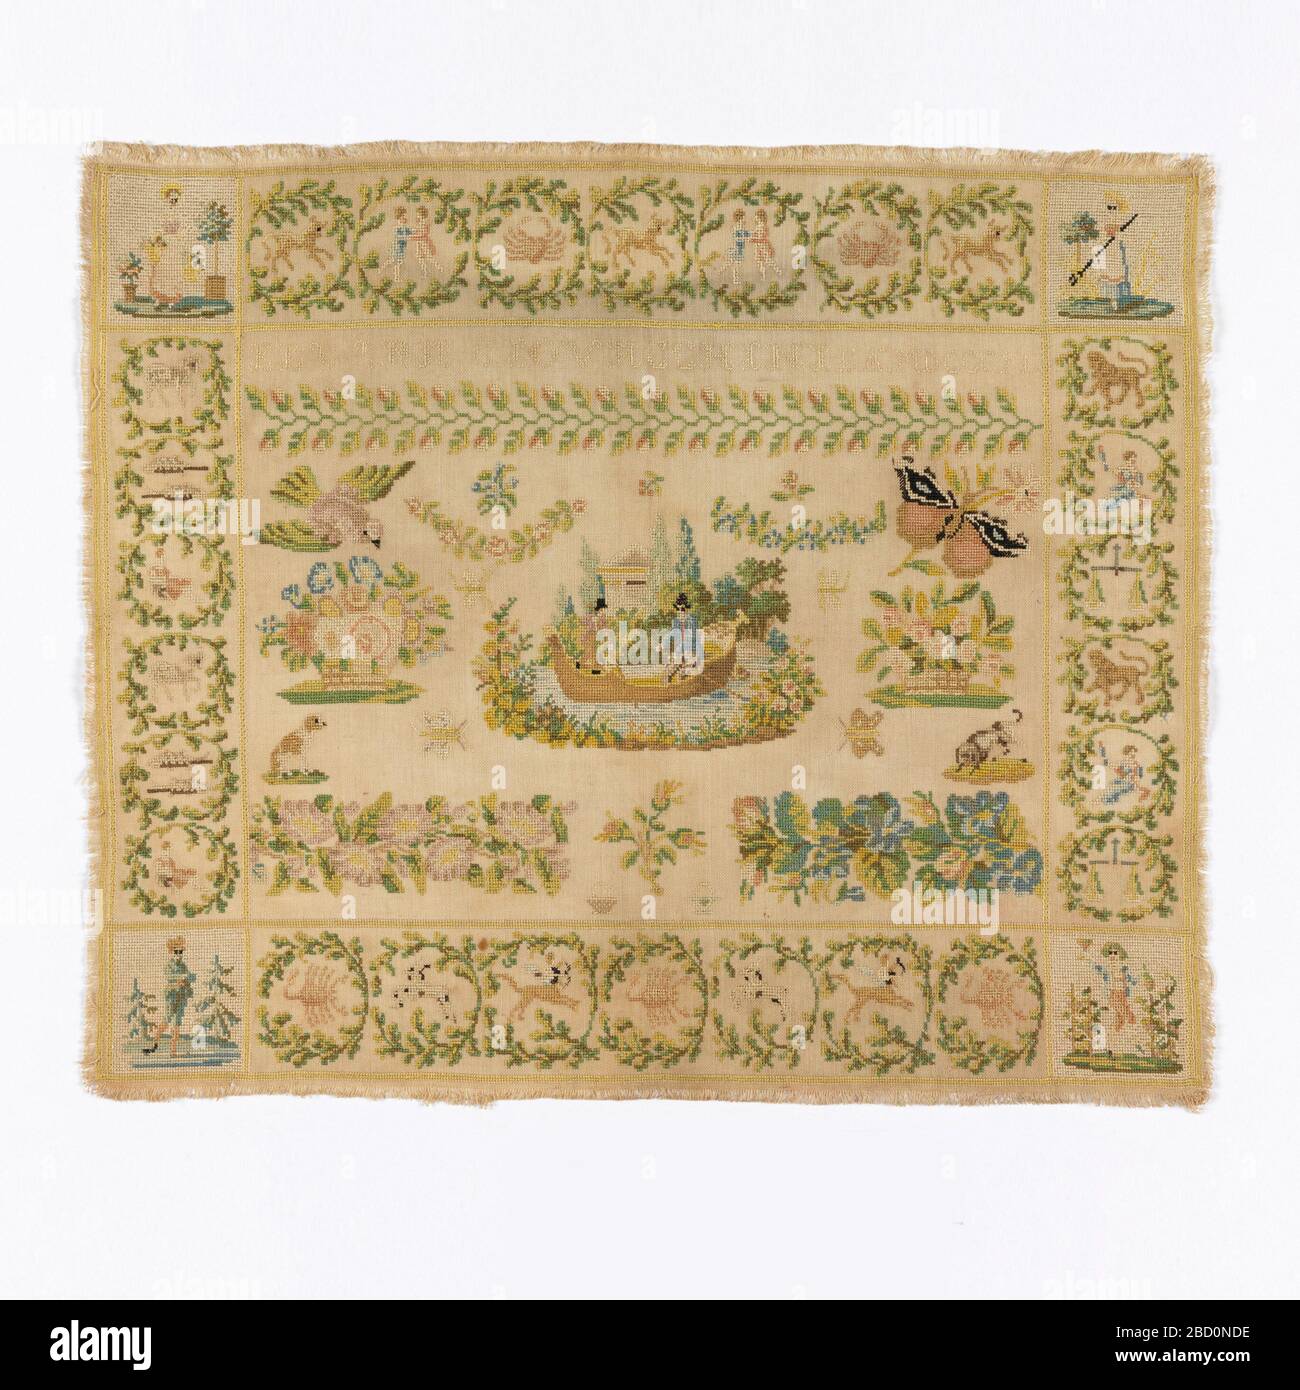 Sampler. Research in ProgressSignature and floral motifs within 5.5 cm (2 3/16') border of the twelve Zodiac signs divided by season. In each corner is a picture of a person personifying one of the four seasons. Idea of Zodiac border continues from 15th-16th century woven tapestries. Sampler Stock Photo